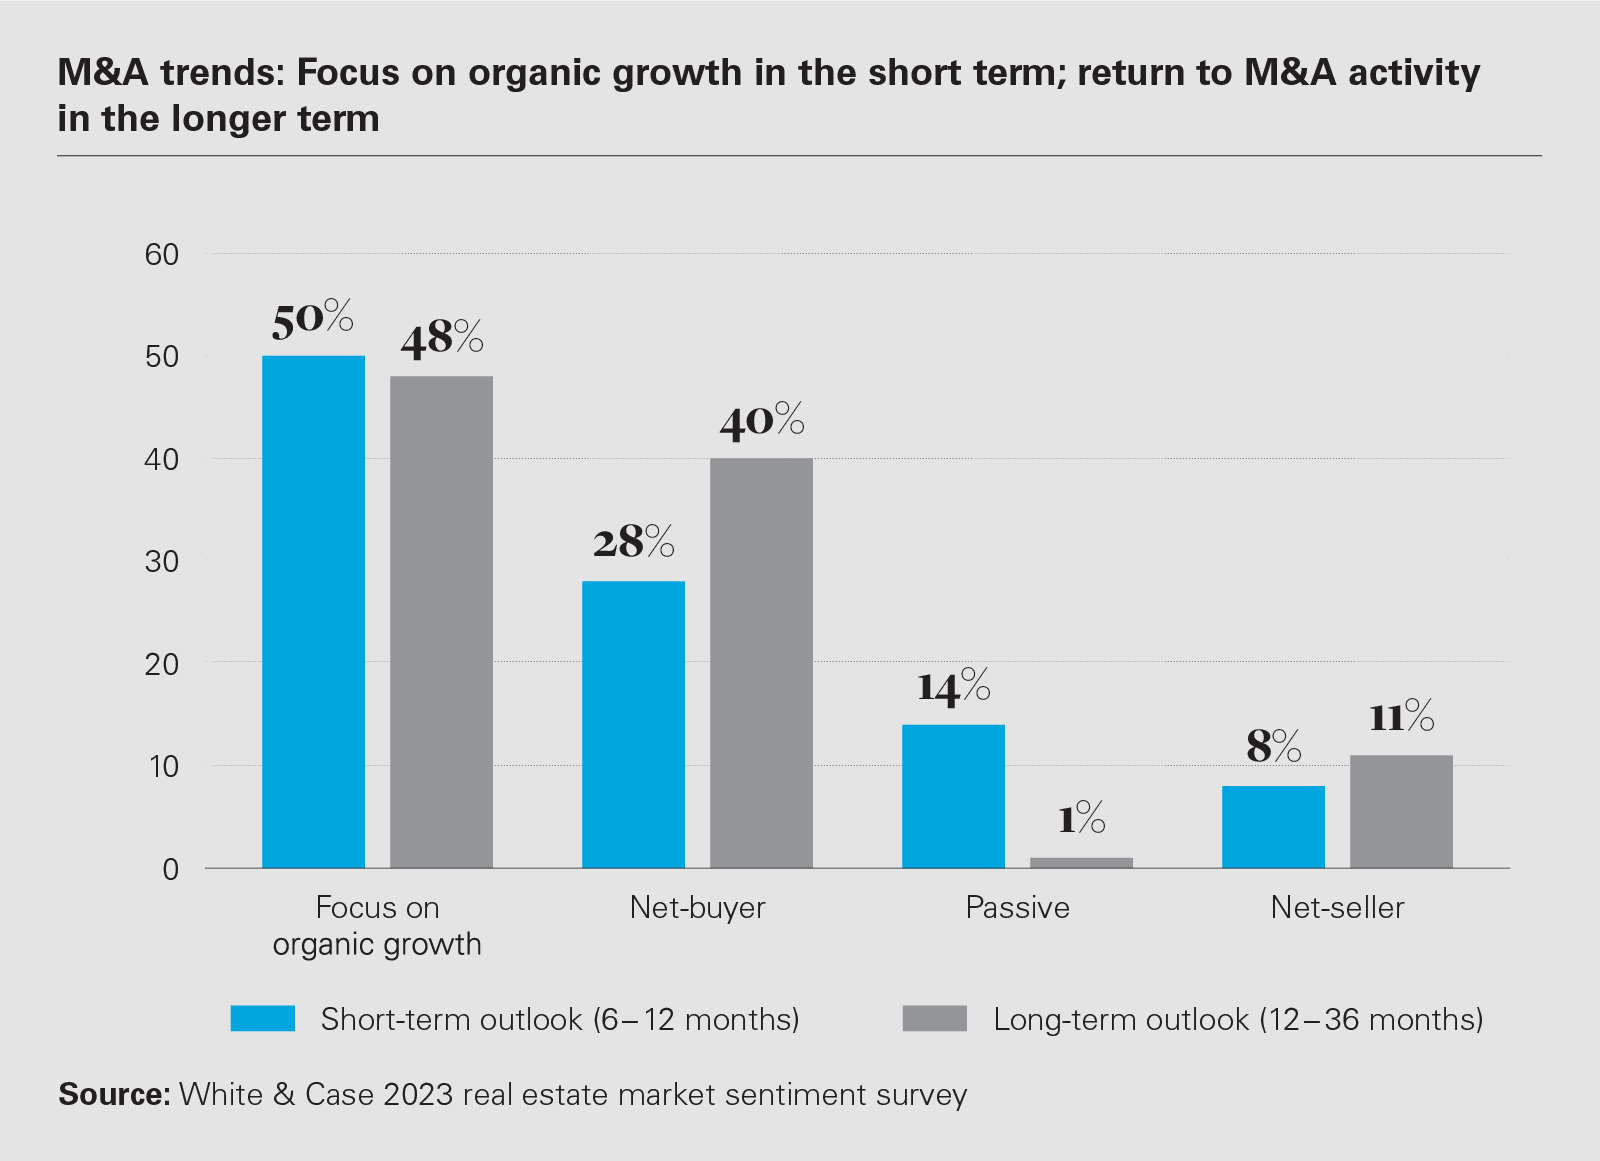 M&A trends: Focus on organic growth in the short term; return to M&A activity in the longer term